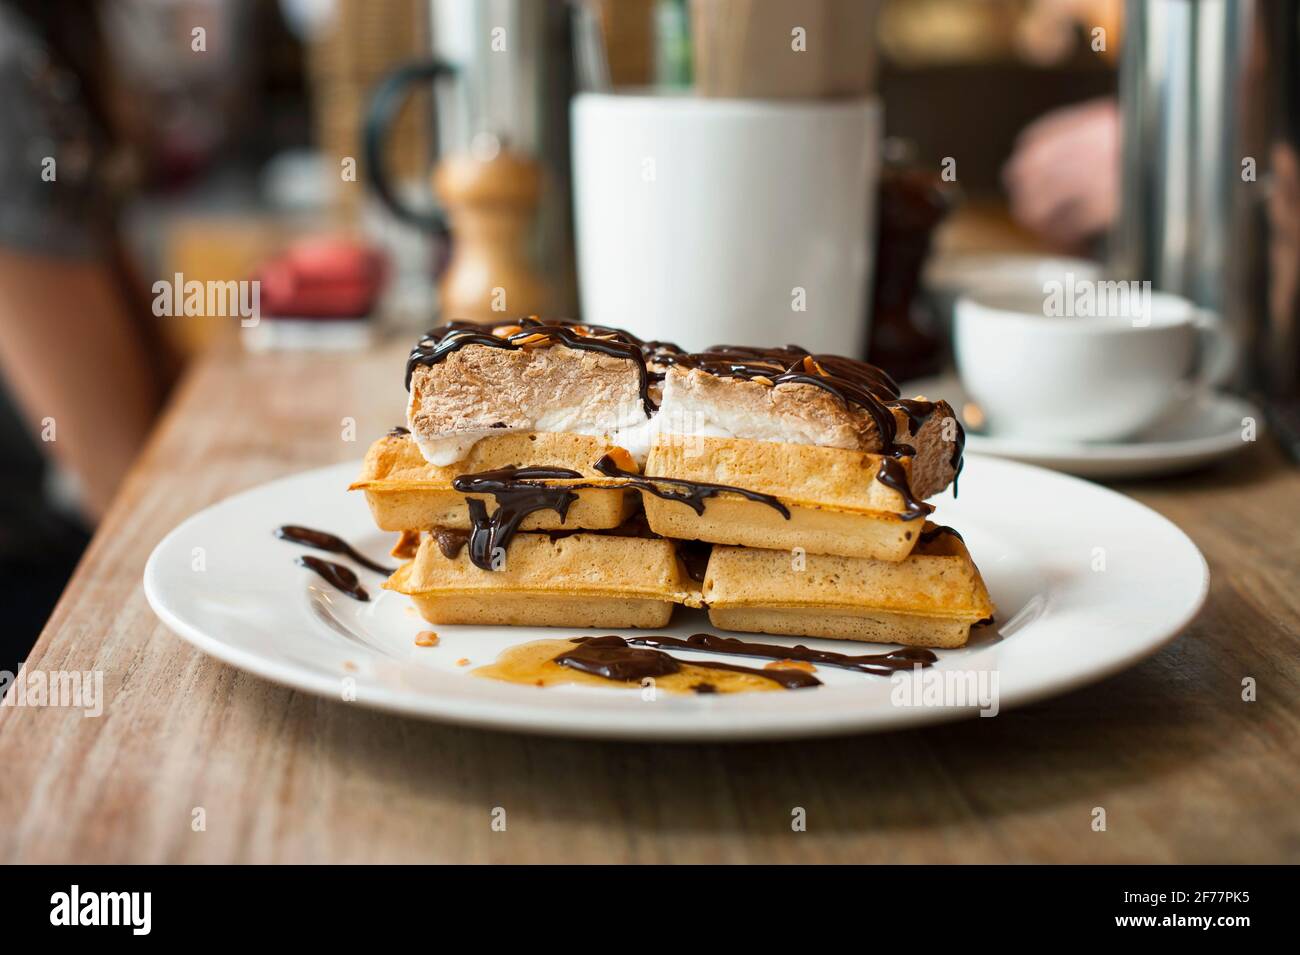 Belgian waffle with cream and chocolate served in a café. London, UK Stock Photo